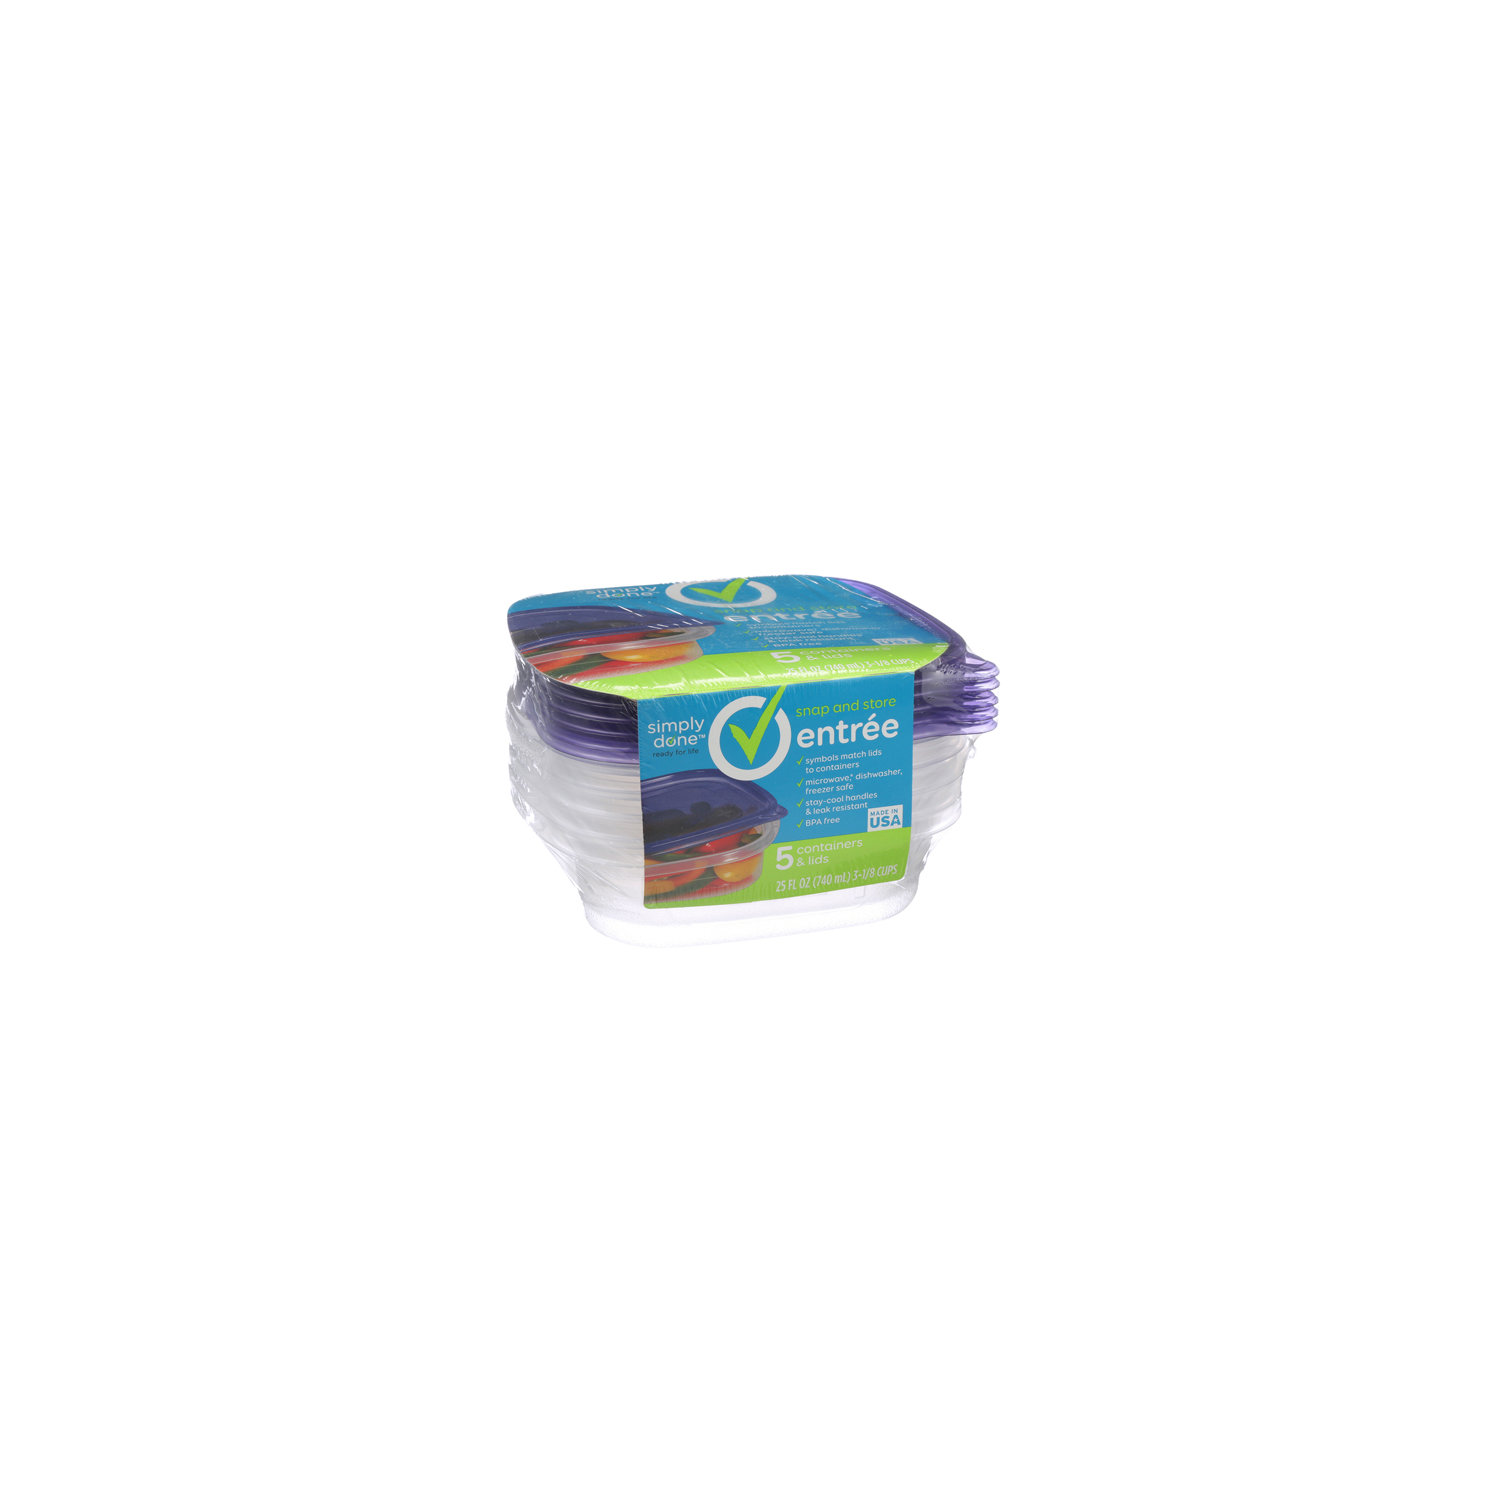 Simply Done Large Rectangle Containers & Lids 2Ct